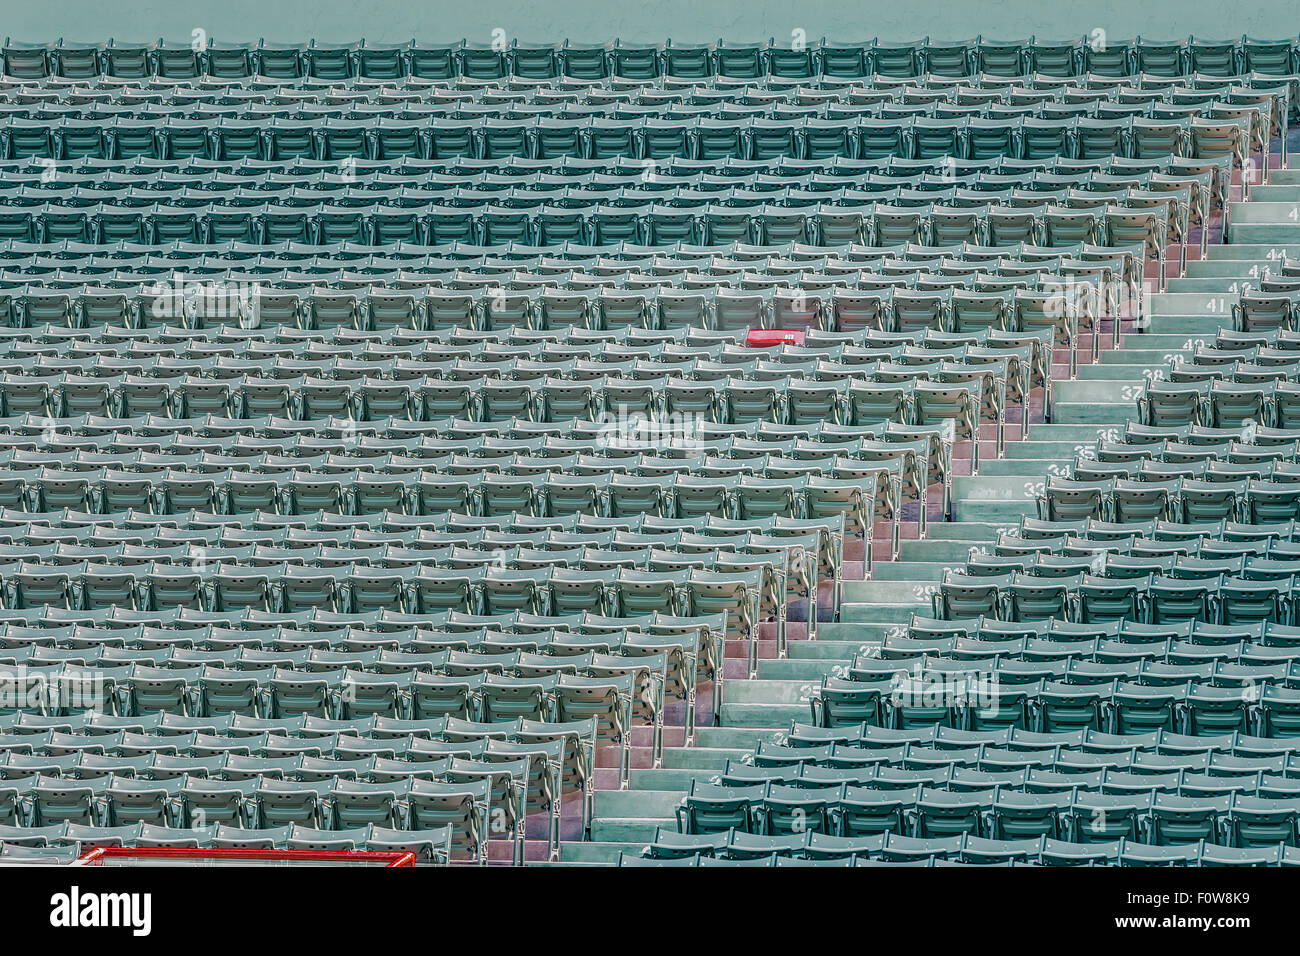 Fenway Park Red Chair Number 21 - The lone red seat in the right field bleachers (Section 42, Row 37, Seat 21) signifies the longest home run ever hit at Fenway. The home run, hit by Ted Williams on June 9, 1946, was officially measured at 502 feet. Stock Photo